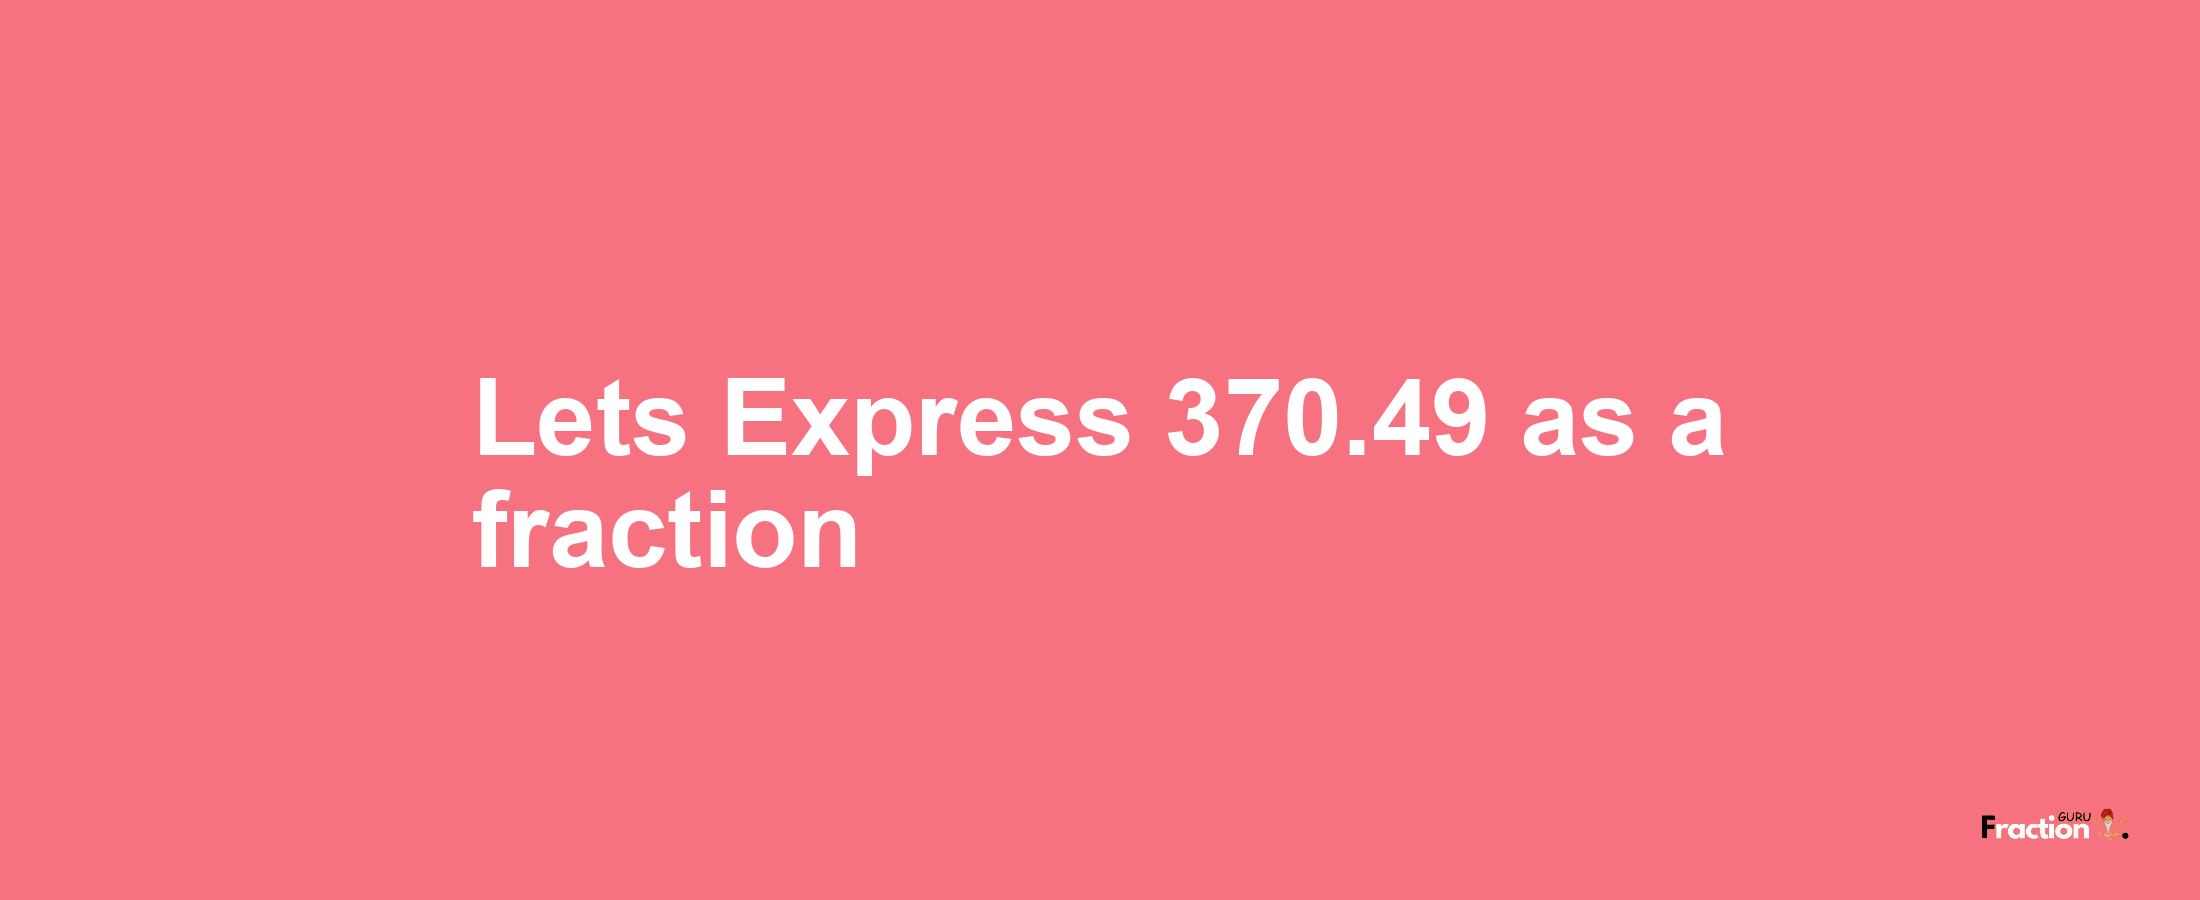 Lets Express 370.49 as afraction